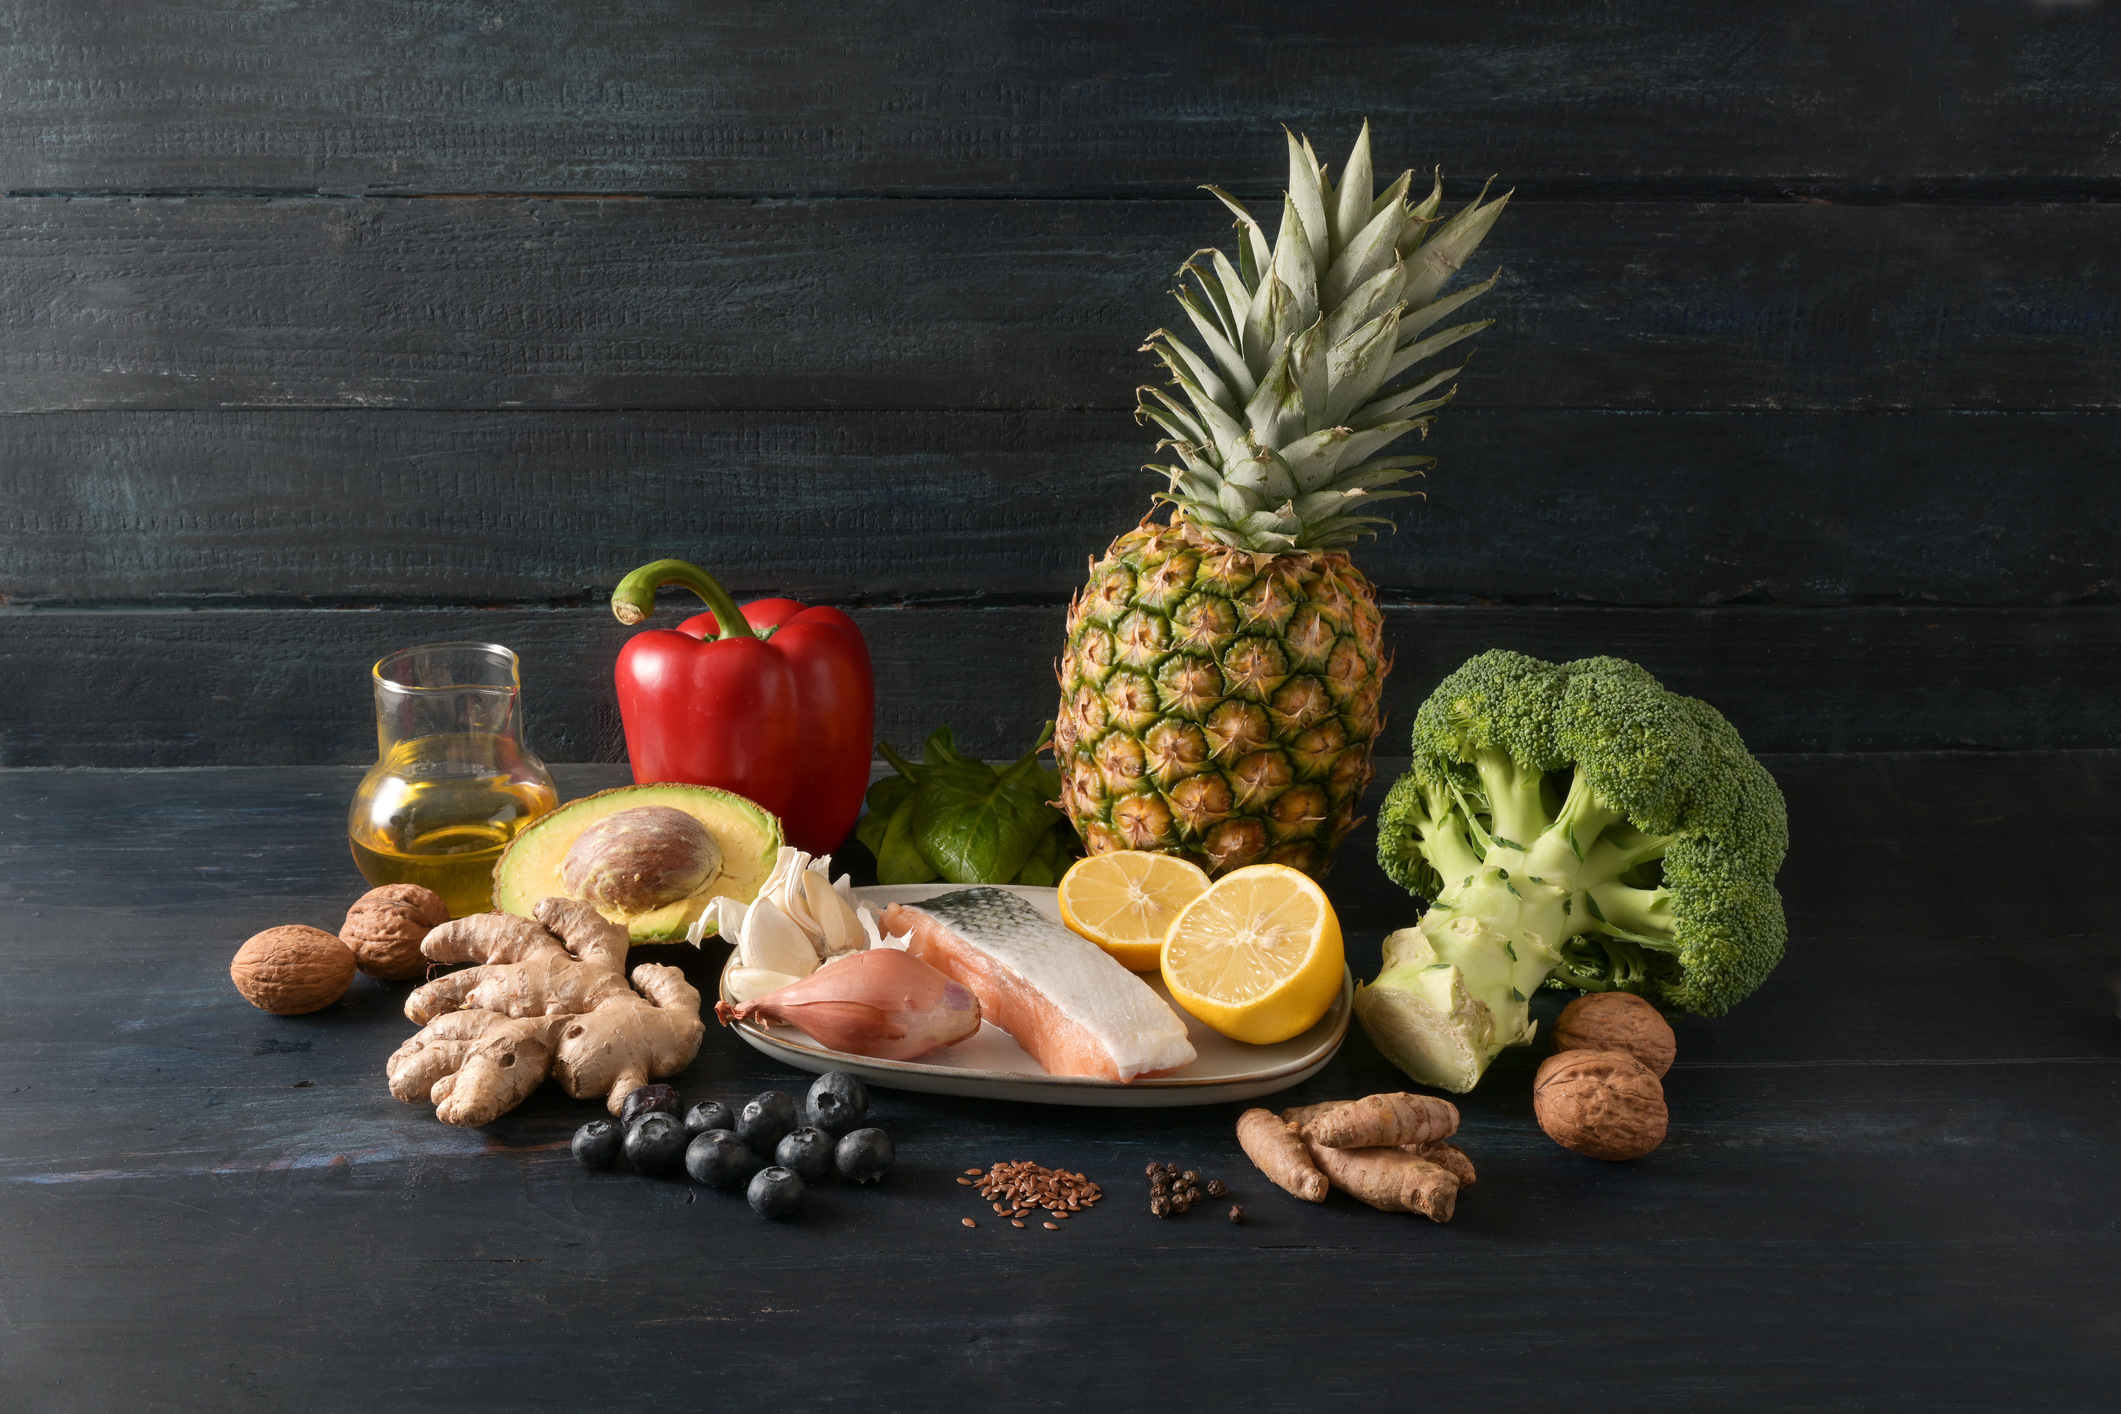 Anti-inflammatory diet -Image of vegetables, fish, fruits, nuts and spices for an anti-inflammatory and antioxidant diet, dark rustic wooden background